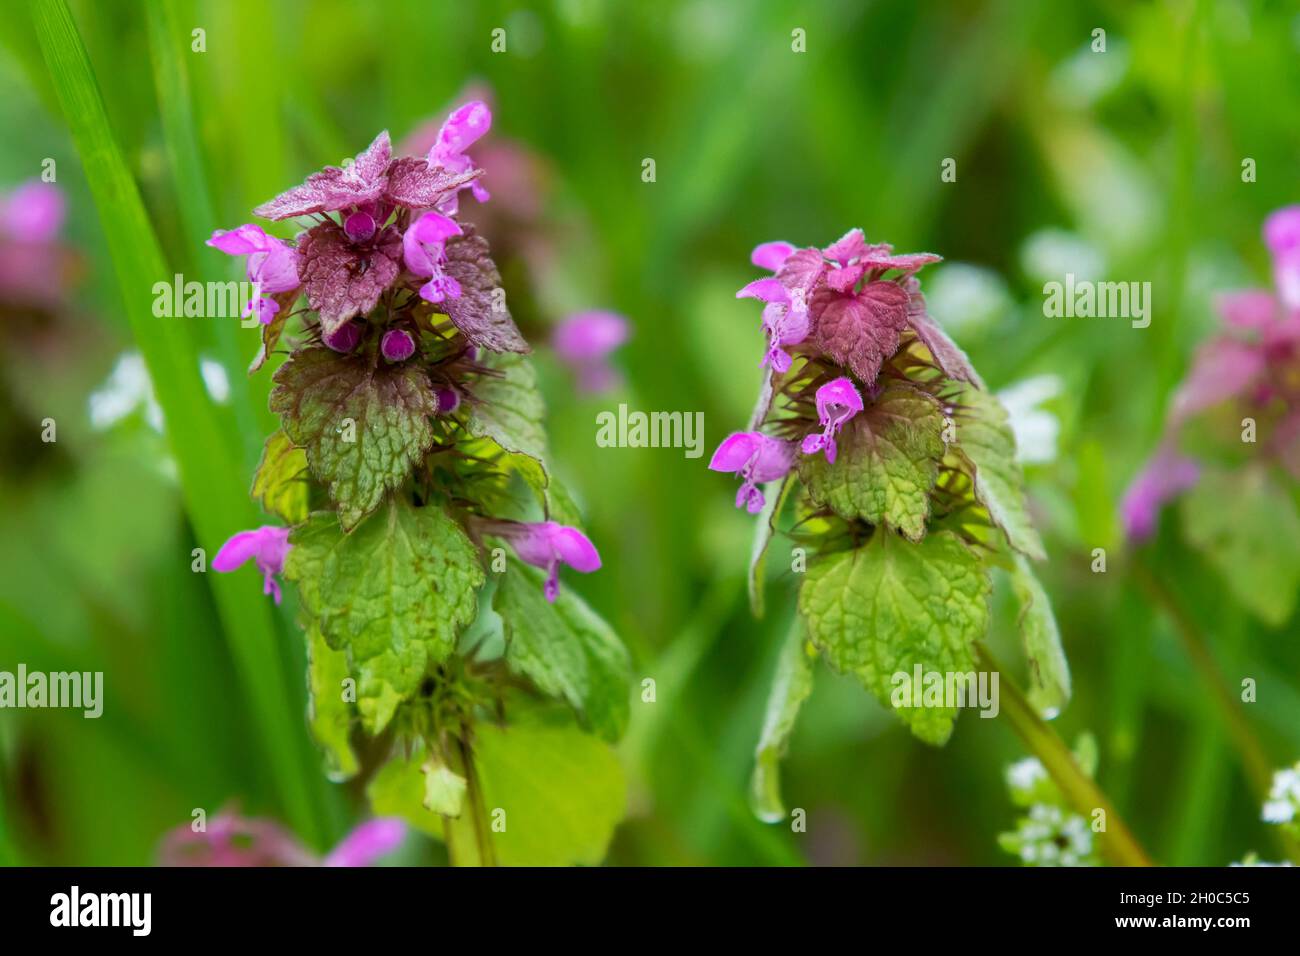 Red Dead-nettle (Lamium purpureum) In bloom in spring in a forest path, Belleville communal forest, Lorraine, France Stock Photo